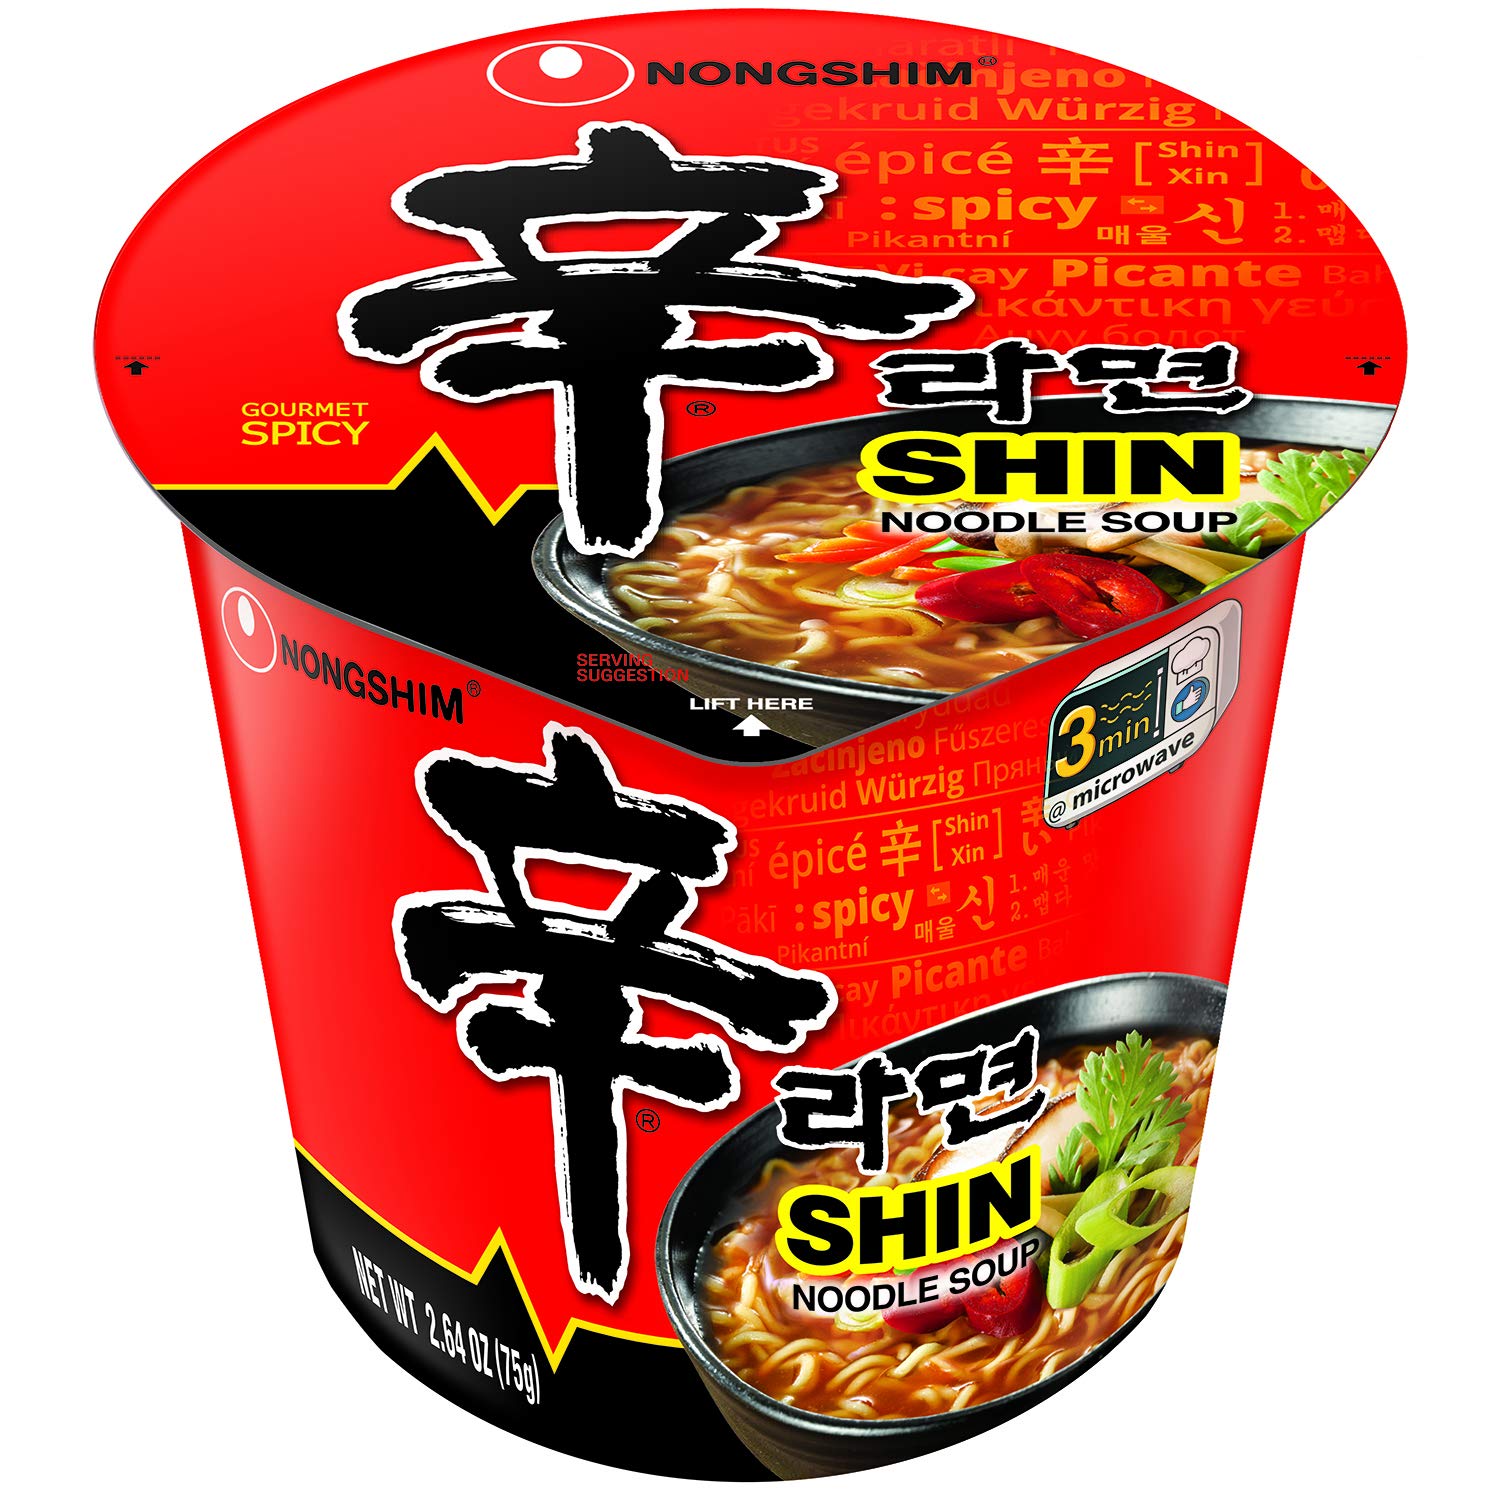 6-Pack 2.64-Oz Nongshim Shin Cup Noodle Soup (Gourmet Spicy) $5.90 w/ S&S + Free Shipping w/ Prime or on $35+